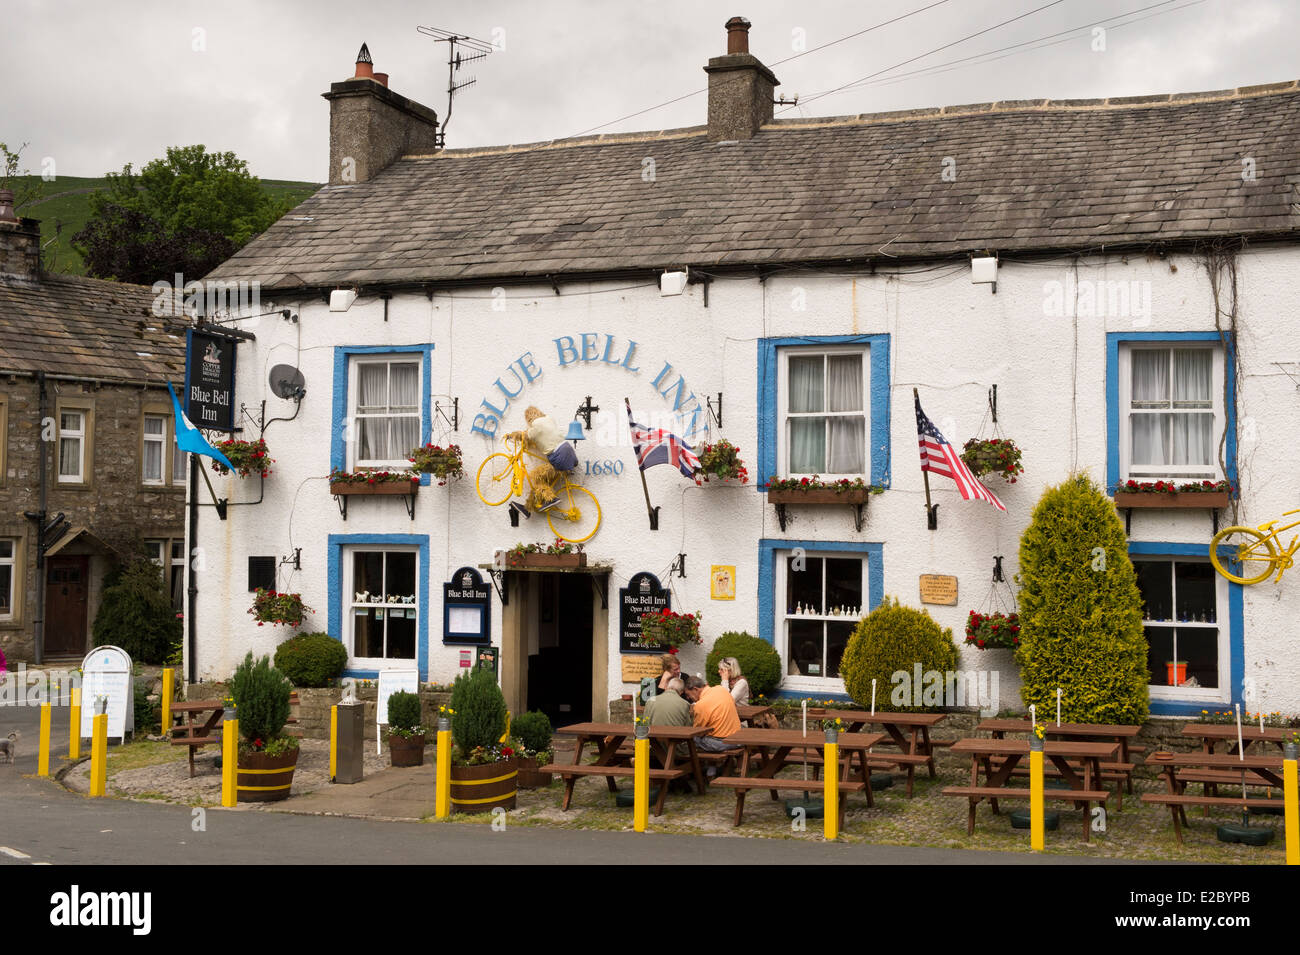 People sit at tables, eat & drink outside attractive, traditional English pub - The Blue Bell Inn, Kettlewell village, Yorkshire Dales, England, UK. Stock Photo